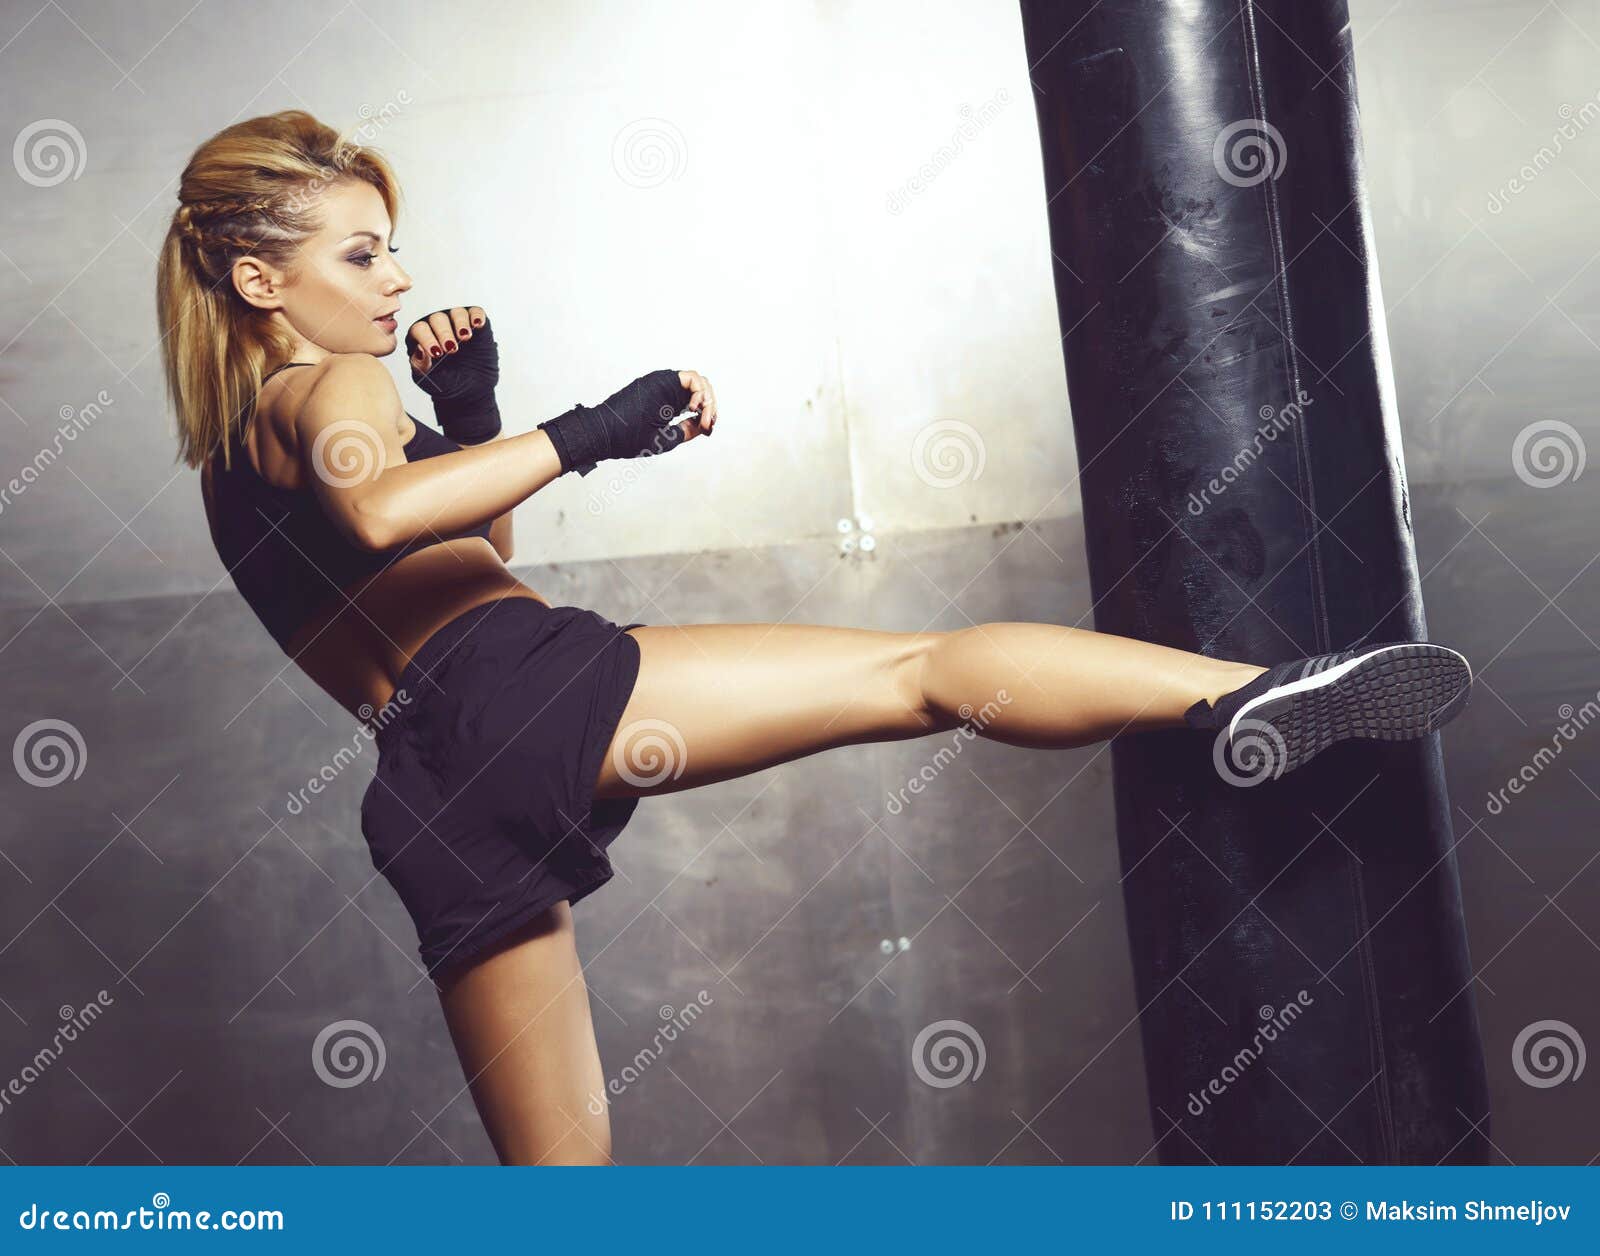 25,416 Training Kickboxing Stock Photos - Free & Royalty-Free Stock Photos  from Dreamstime